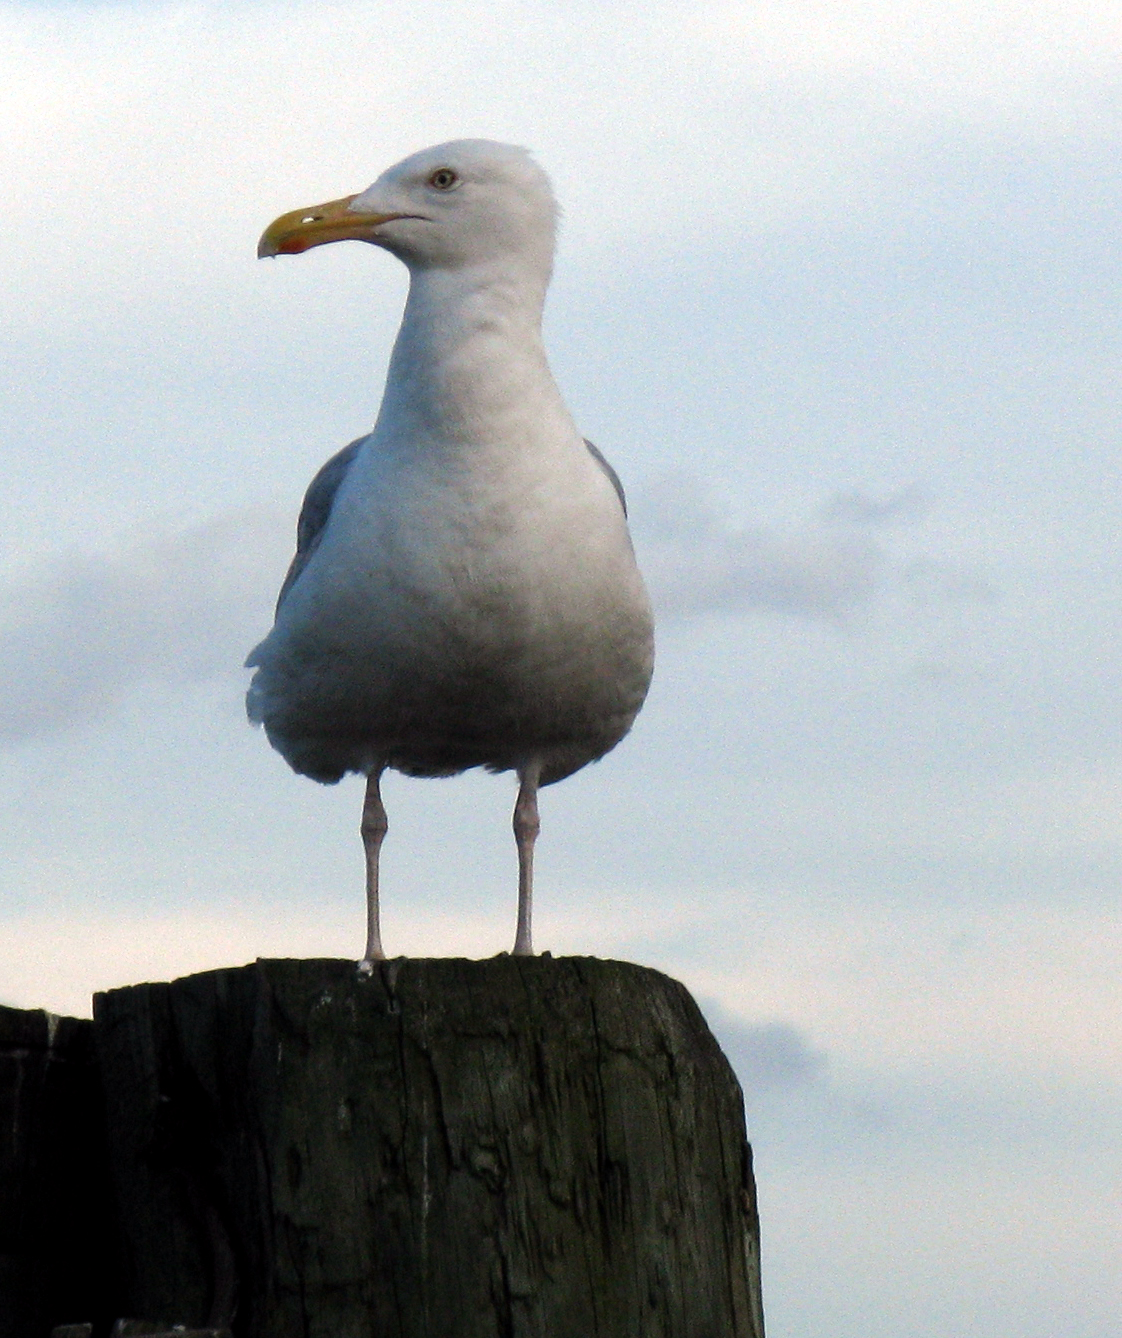 Gull Watching The Harbor (user submitted)